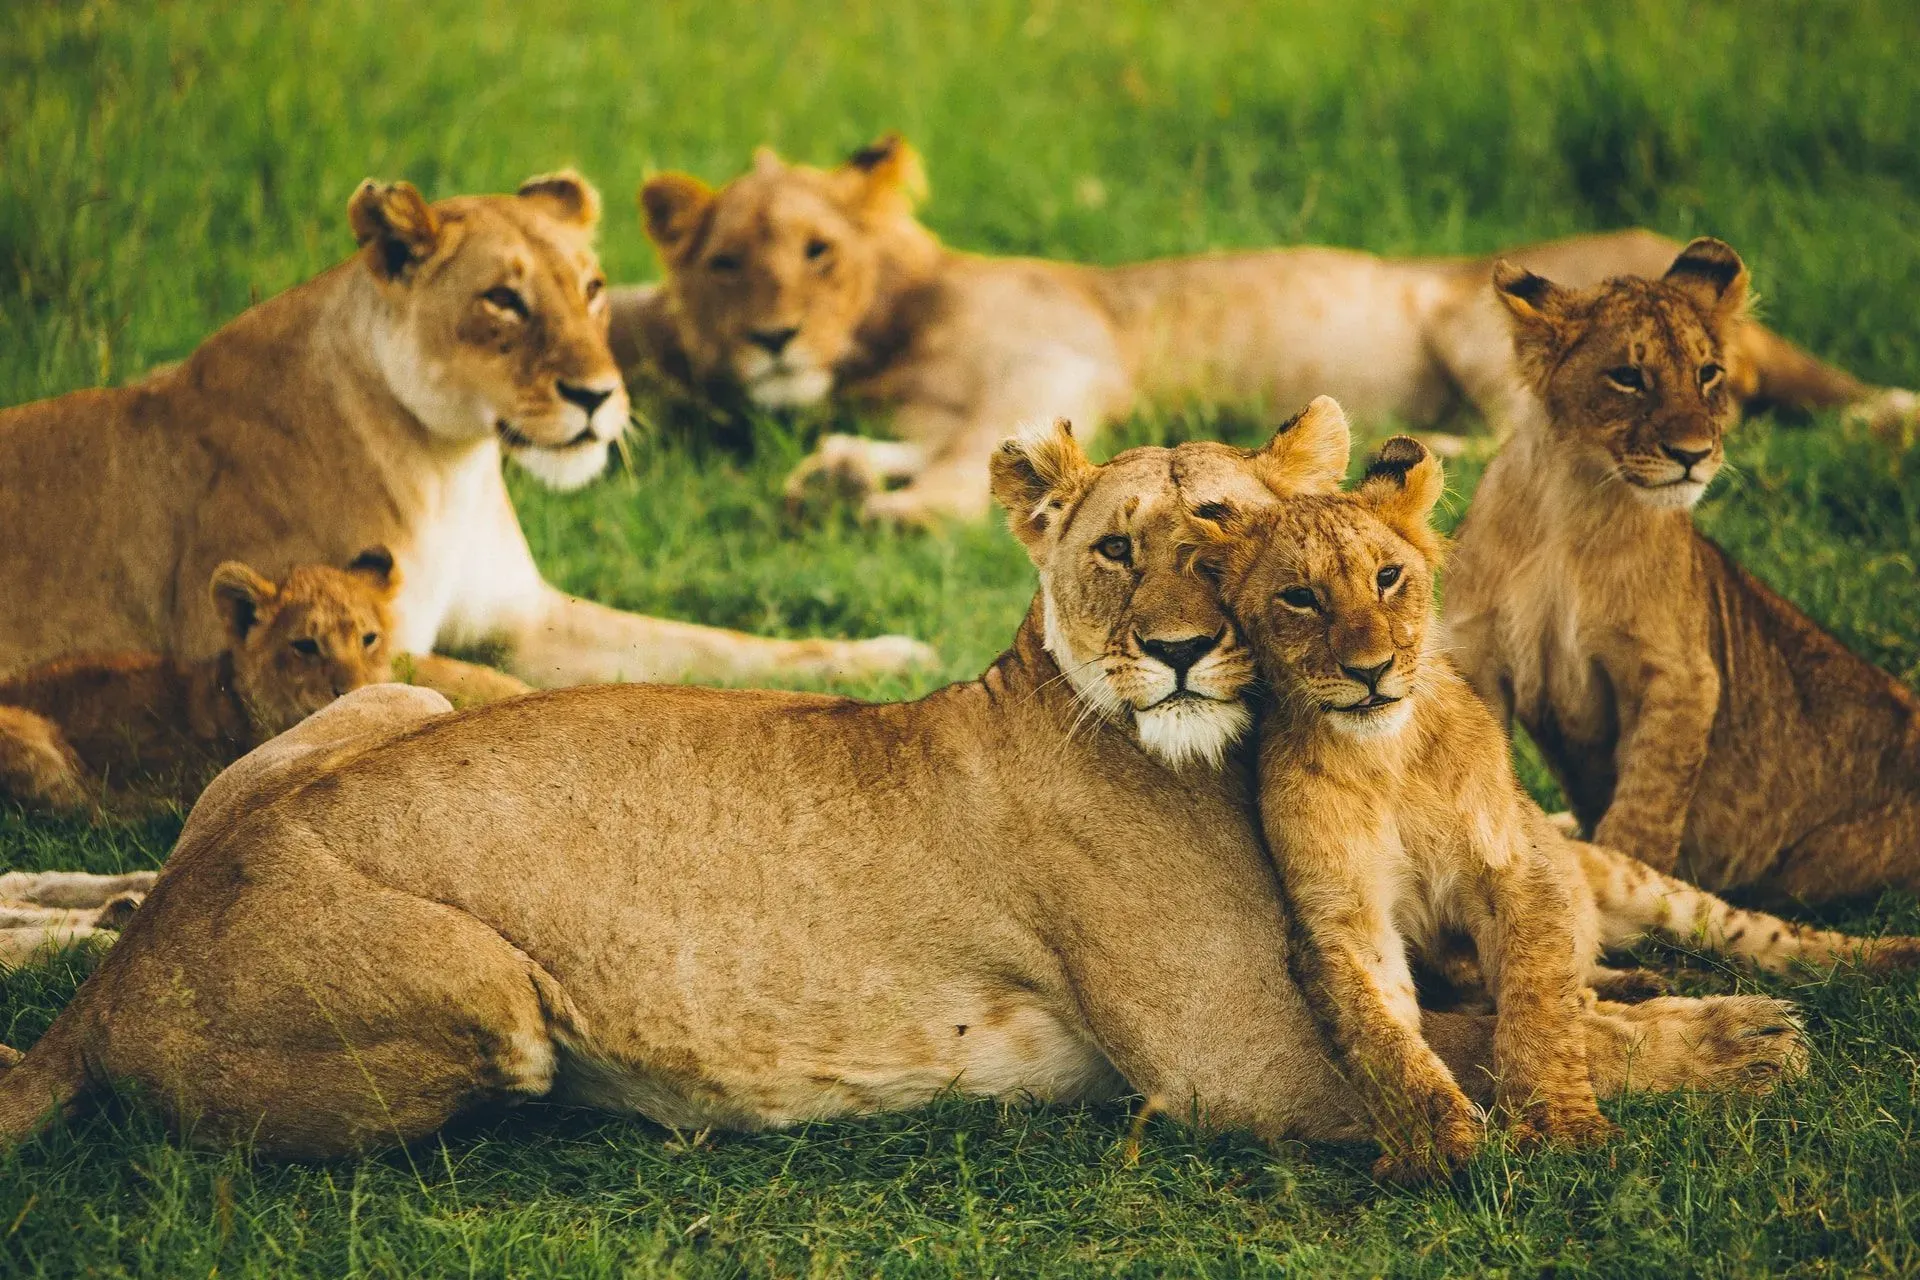 Discover interesting facts about animals that travel in groups here at Kidadl!